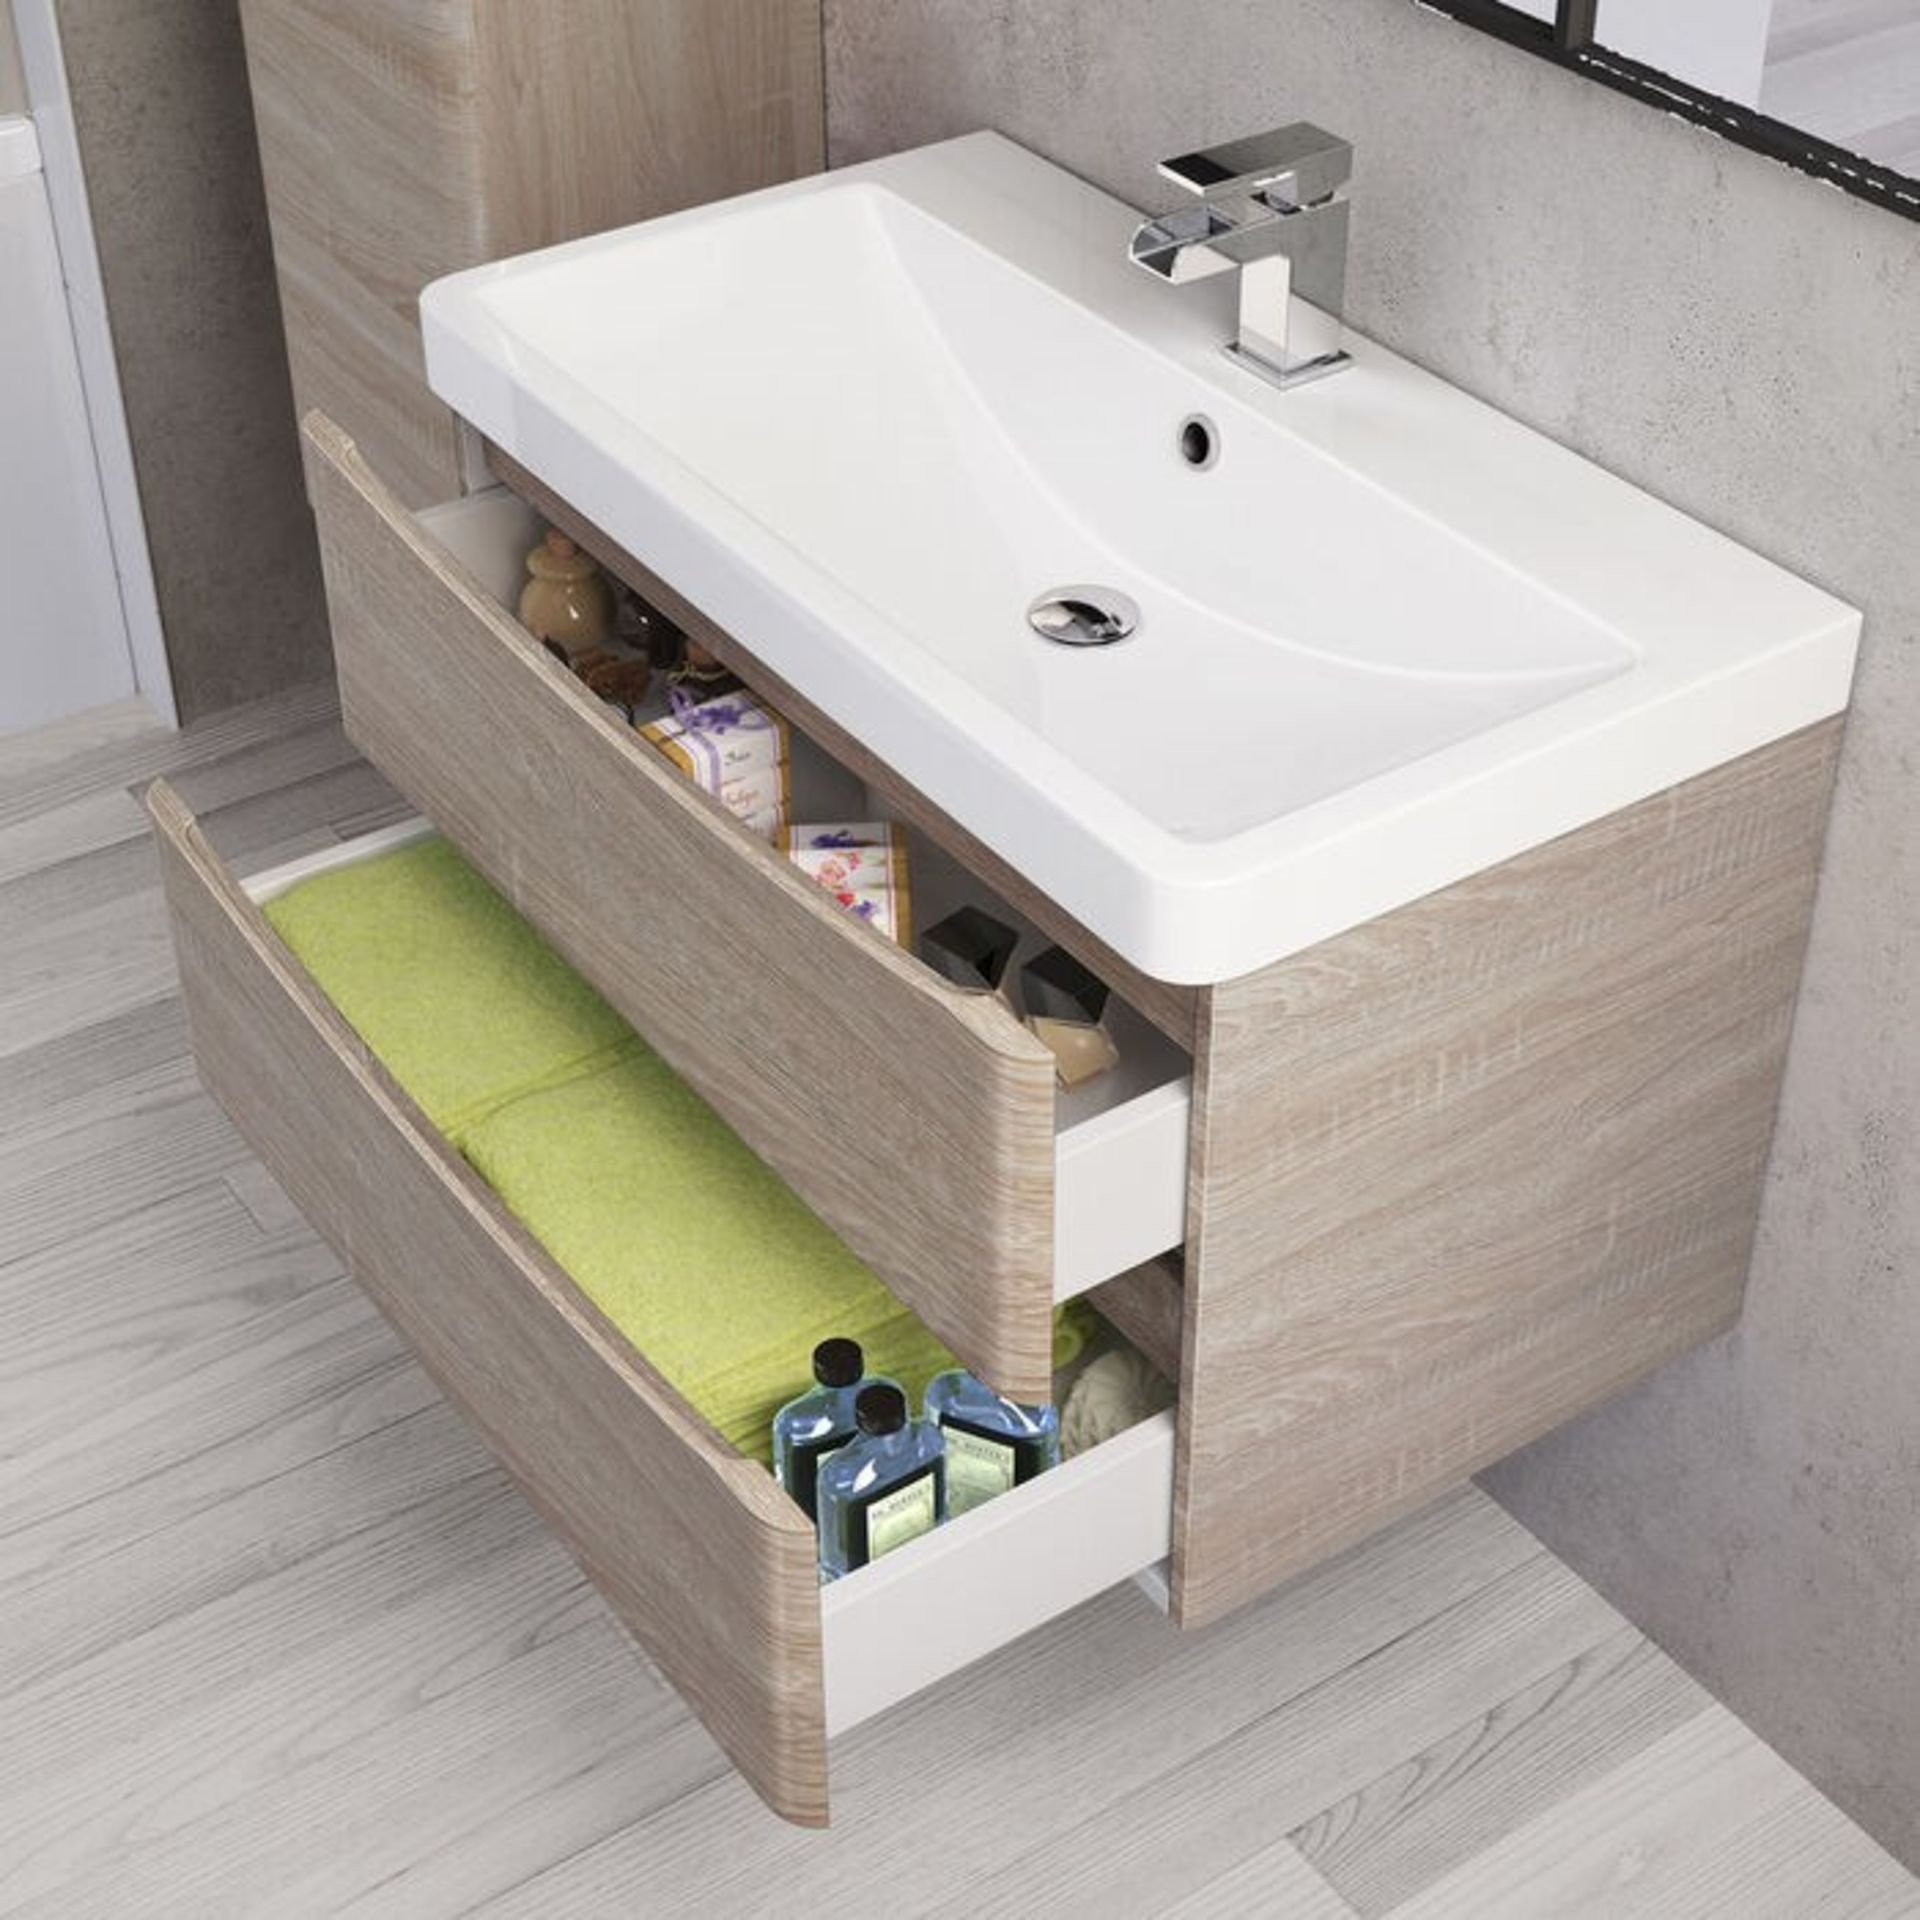 New & Boxed 800mm Austin Ii Light Oak Effect Built In Sink Drawer Unit - Wall Hung. Rrp £849.... - Image 4 of 4